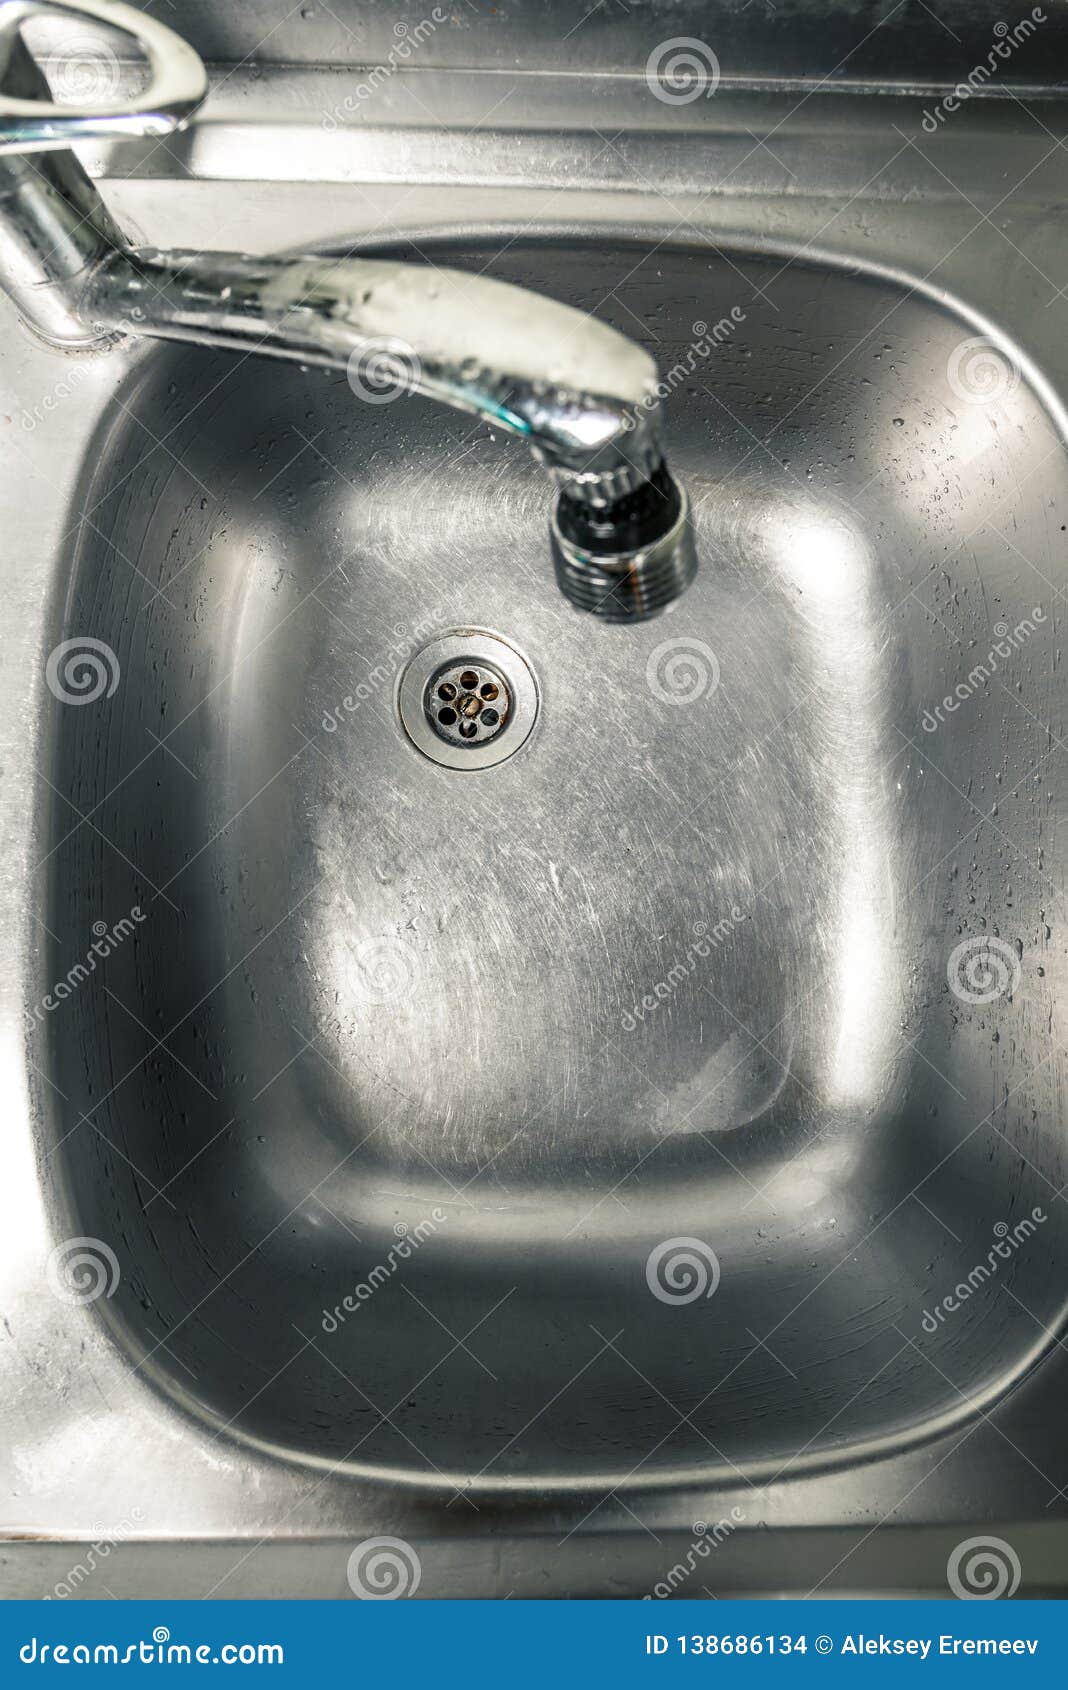 Clean Sink With Faucet Stock Photo Image Of Appliance 138686134